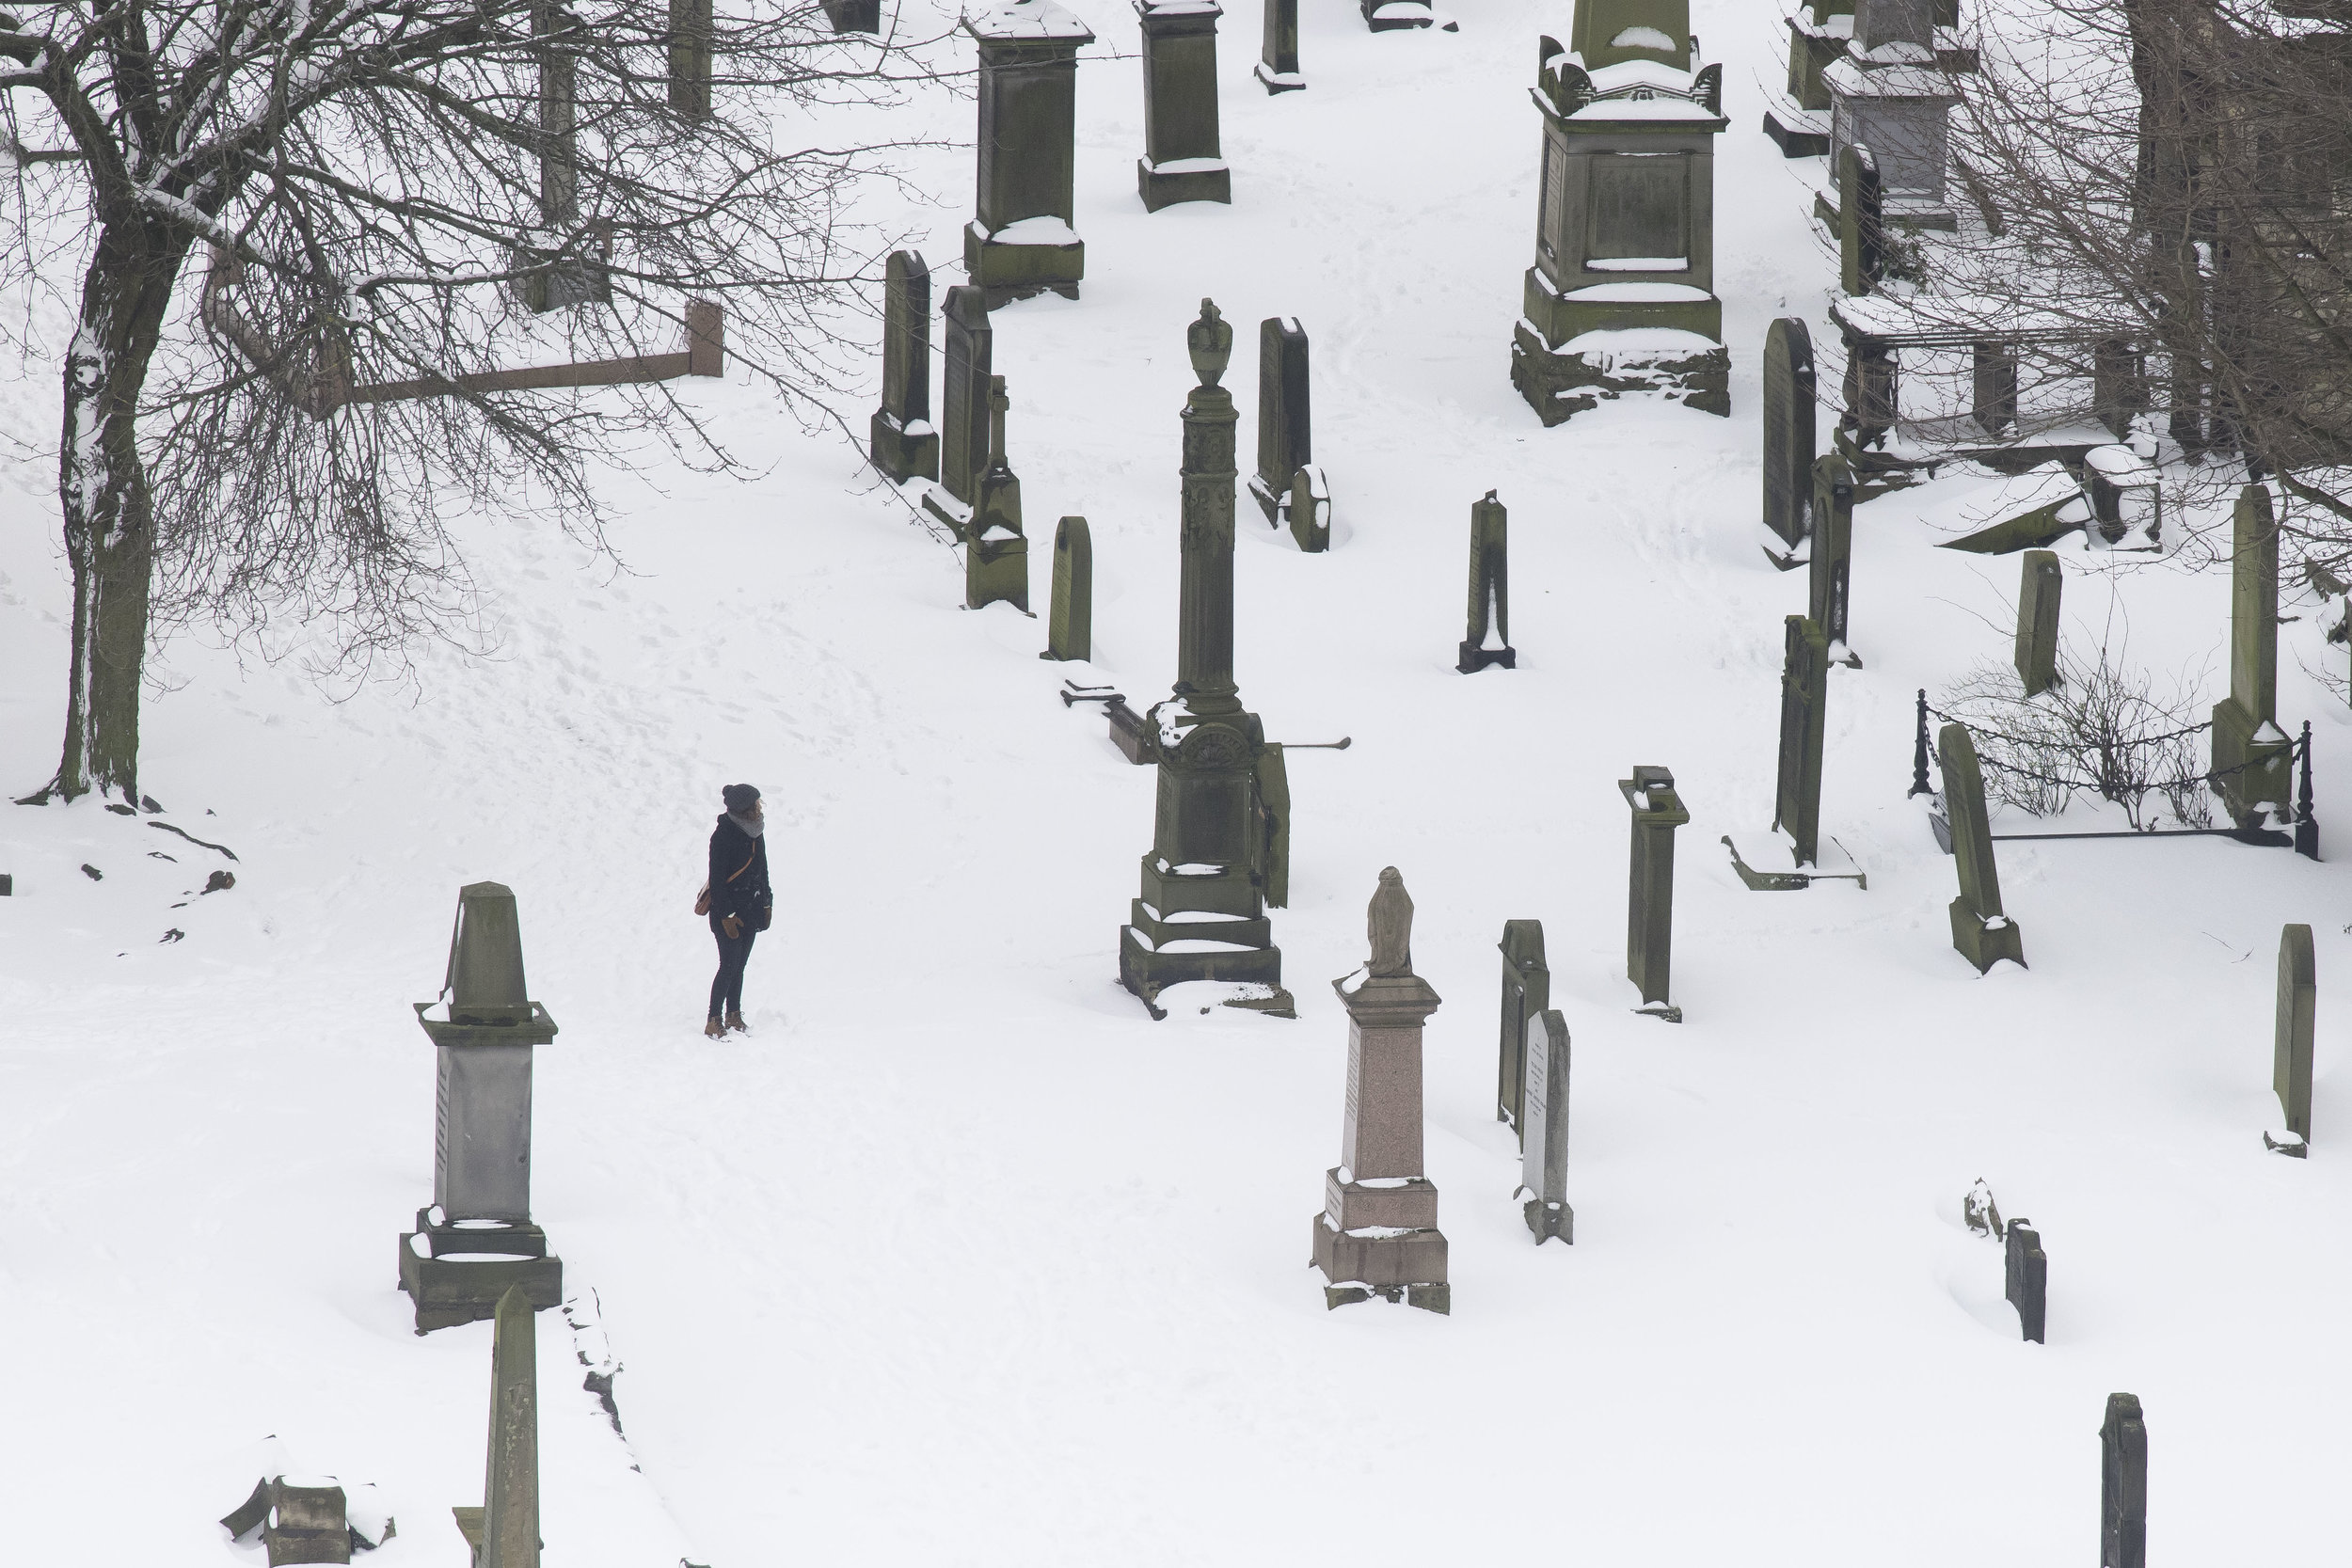  EDINBURGH, SCOTLAND - MARCH 1: A woman walks through a graveyard at Cannongate Kirk Church following heavy snowfall on March 1, 2018 in Edinburgh, United Kingdom. People have been warned not to make unnecessary journeys as the Met office issues a re